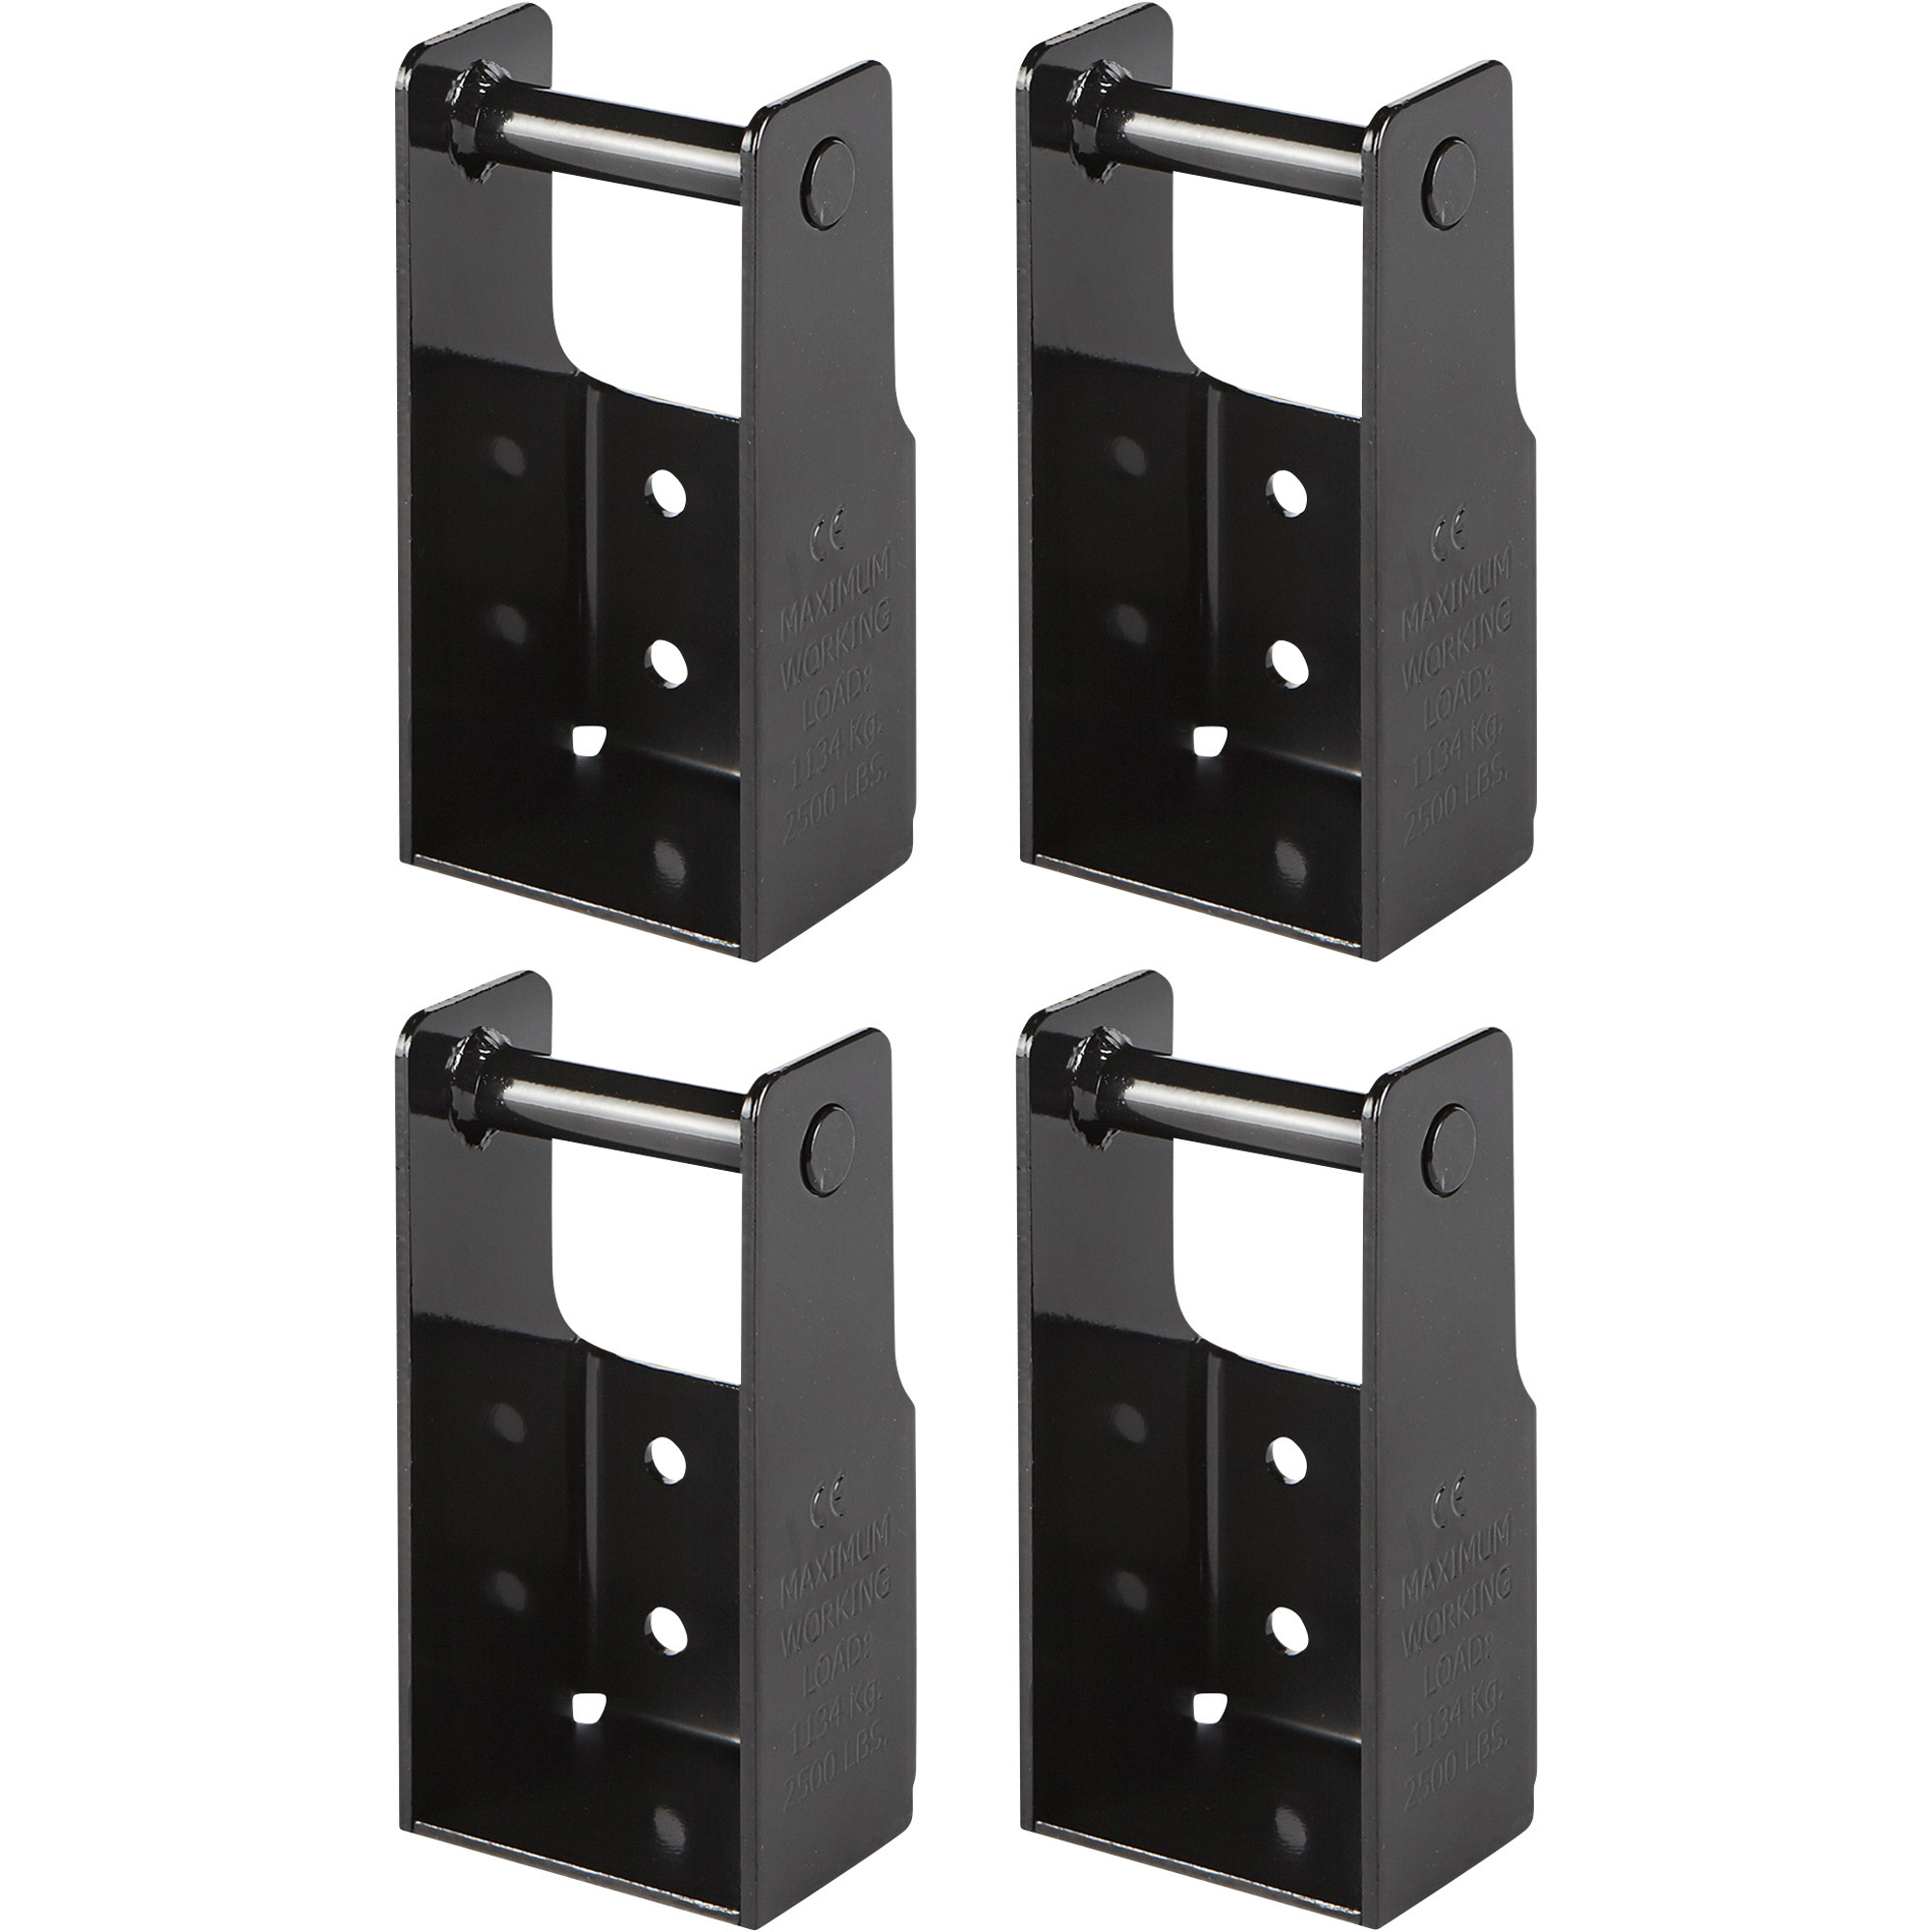 Knaack 4-Piece Crane Lift Set, Fits Mobile and Portable Tool Chests, Model 497